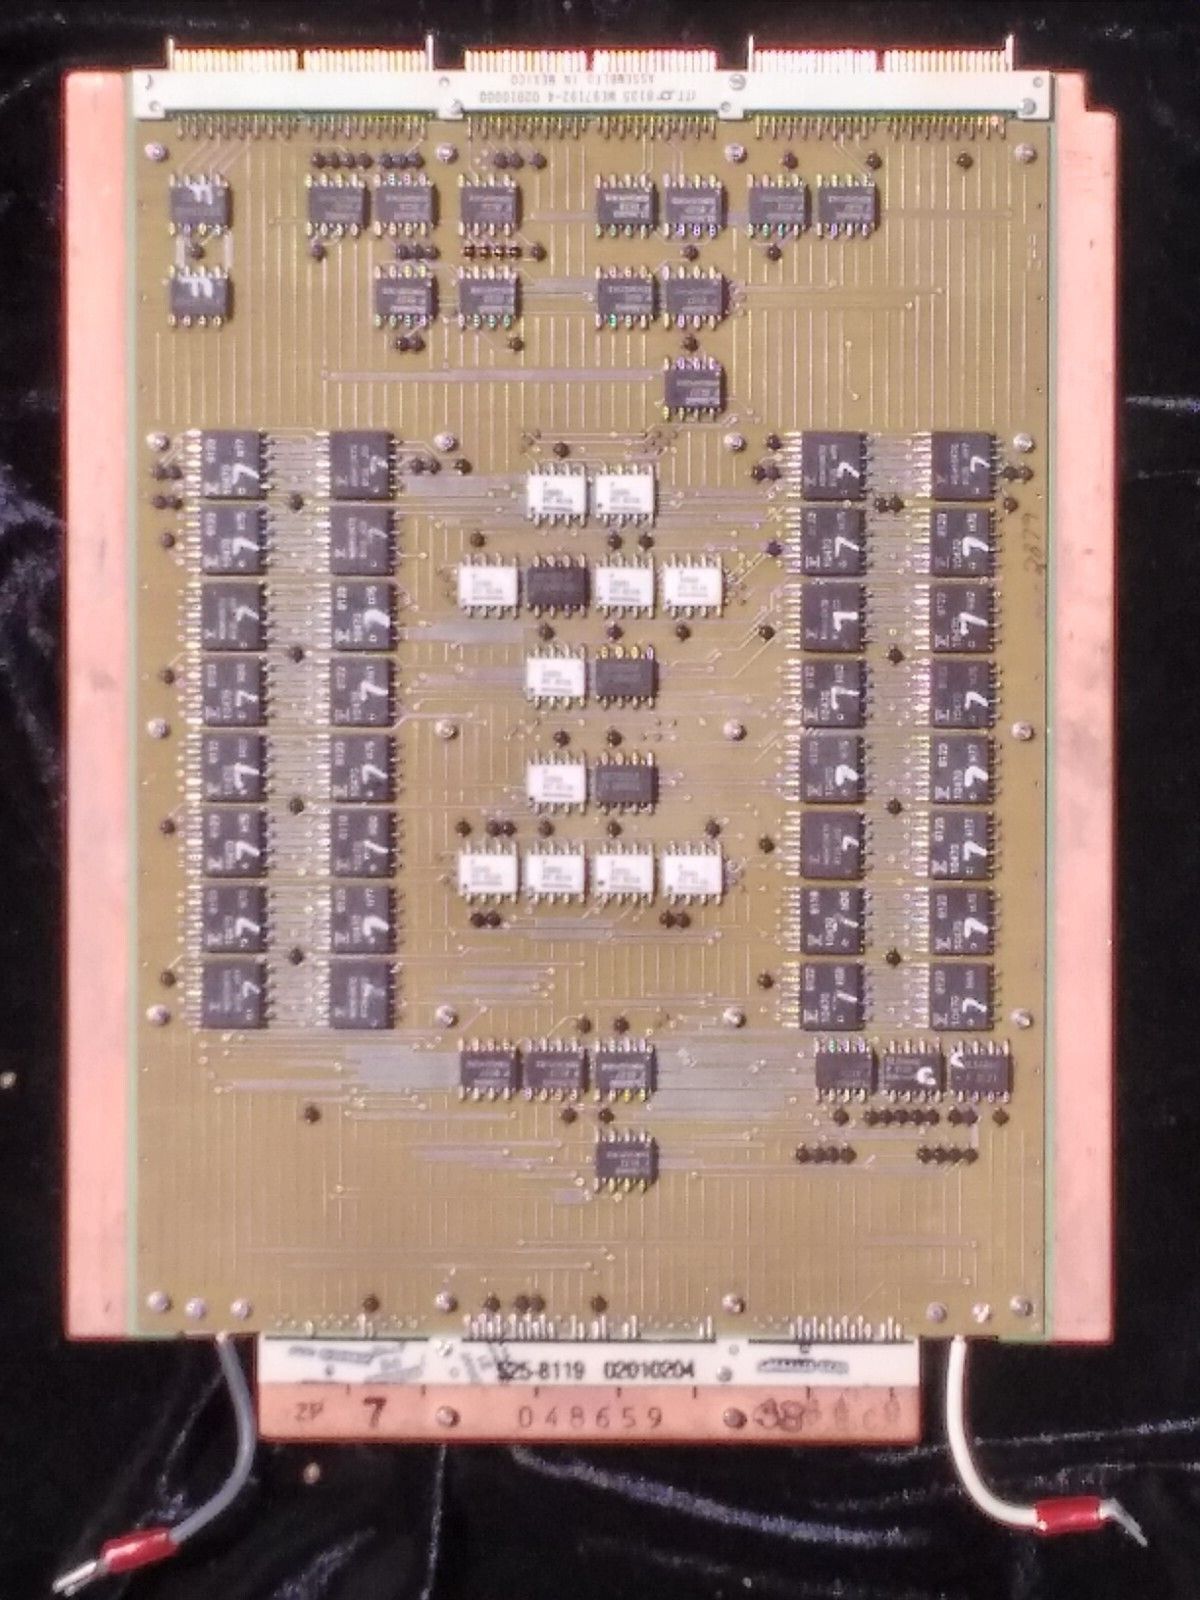 Cray-1 SuperComputer Board Memory ( Both Sides Double the Memory )